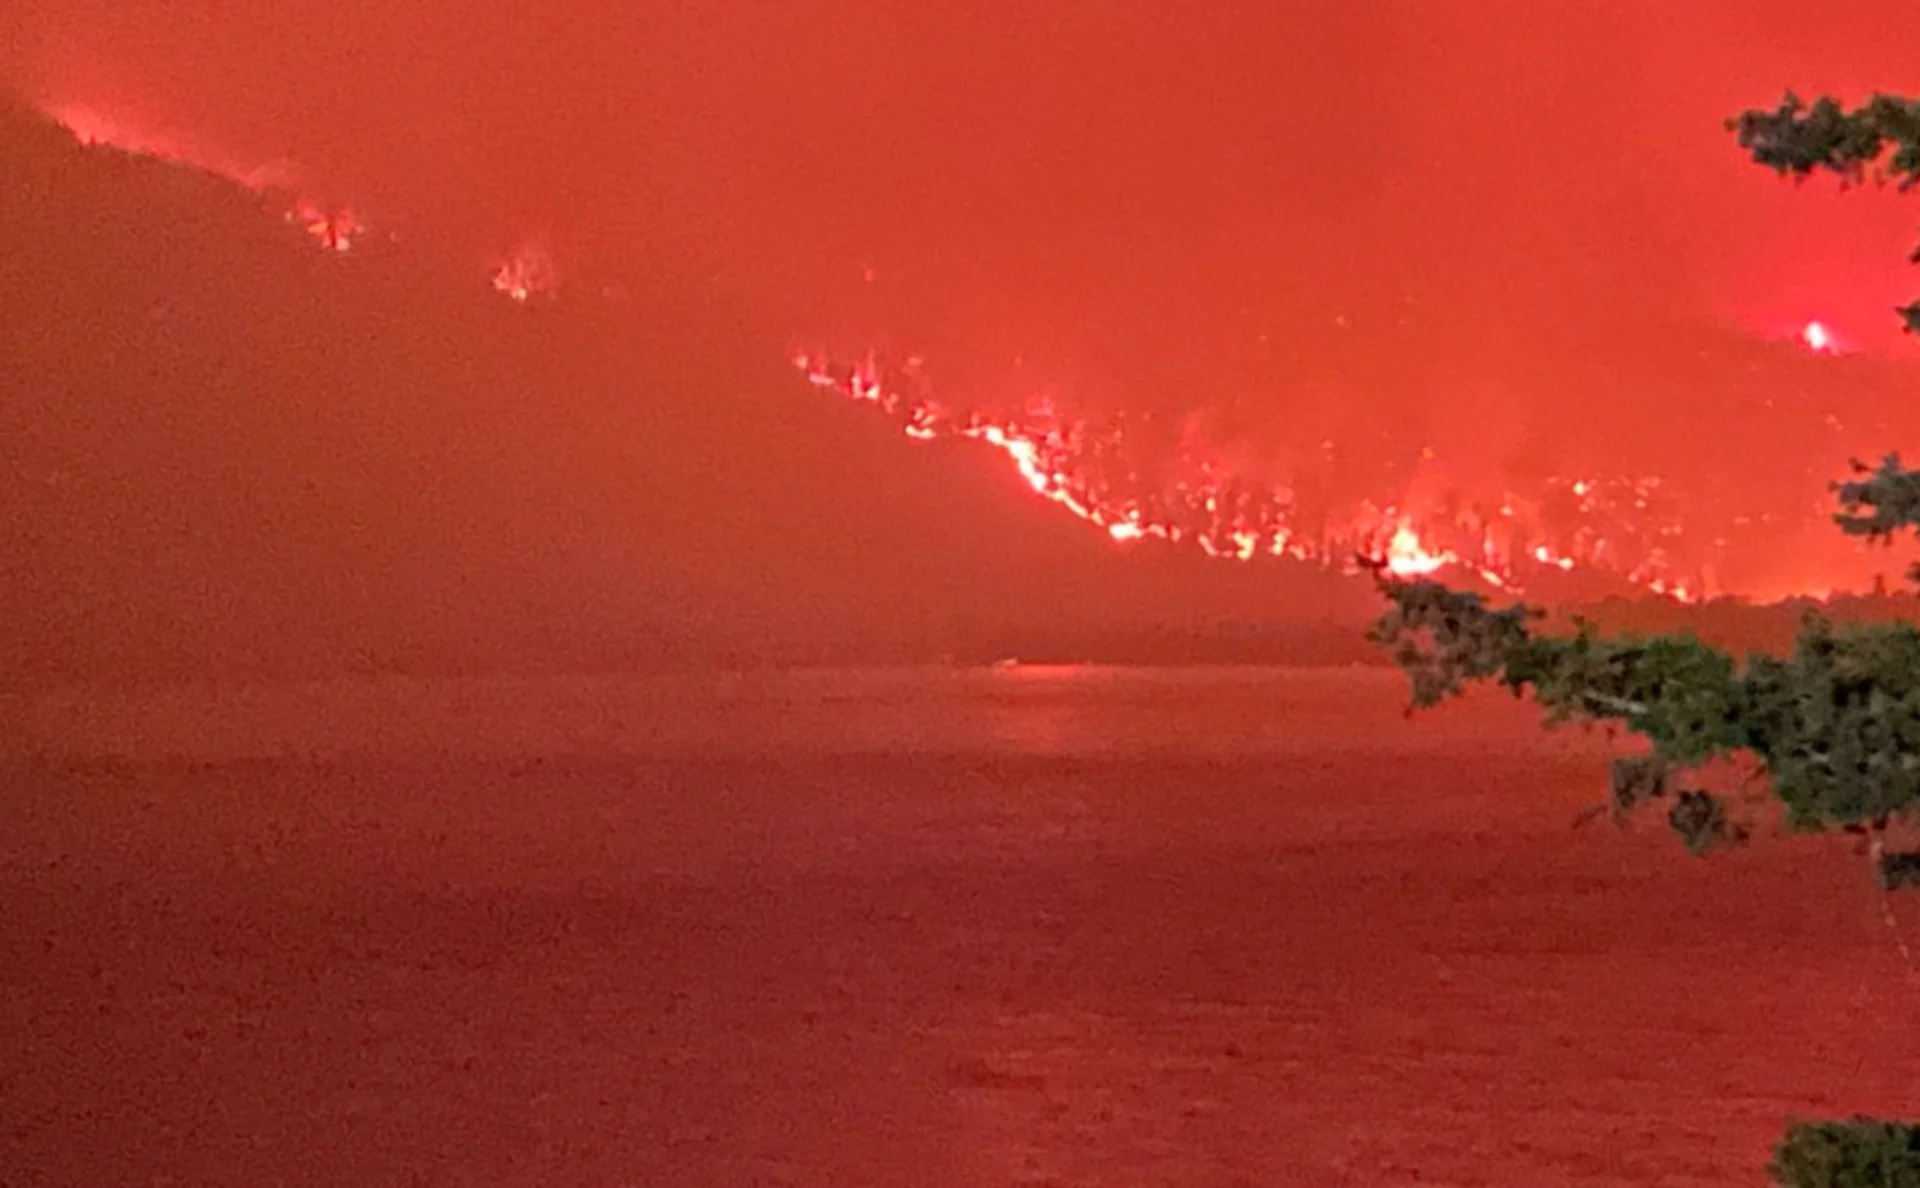 BC wildfires - Nashwito Creek area - lots of candling across the lake. (Jaclyn Whittal/The Weather Network)